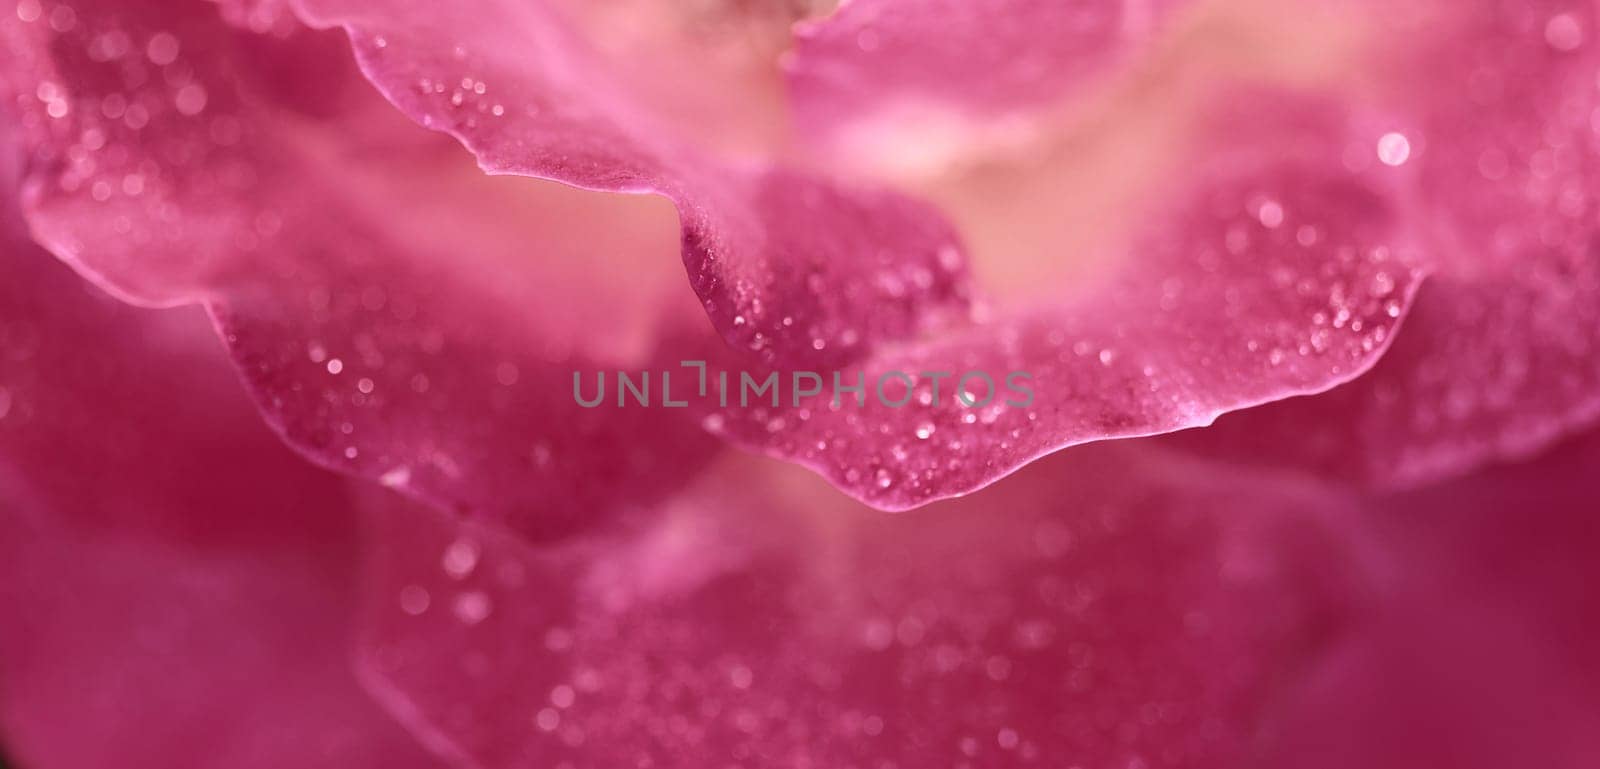 Pink yellow rose flower petals with dew drops. Macro flowers background for holiday design. Soft focus